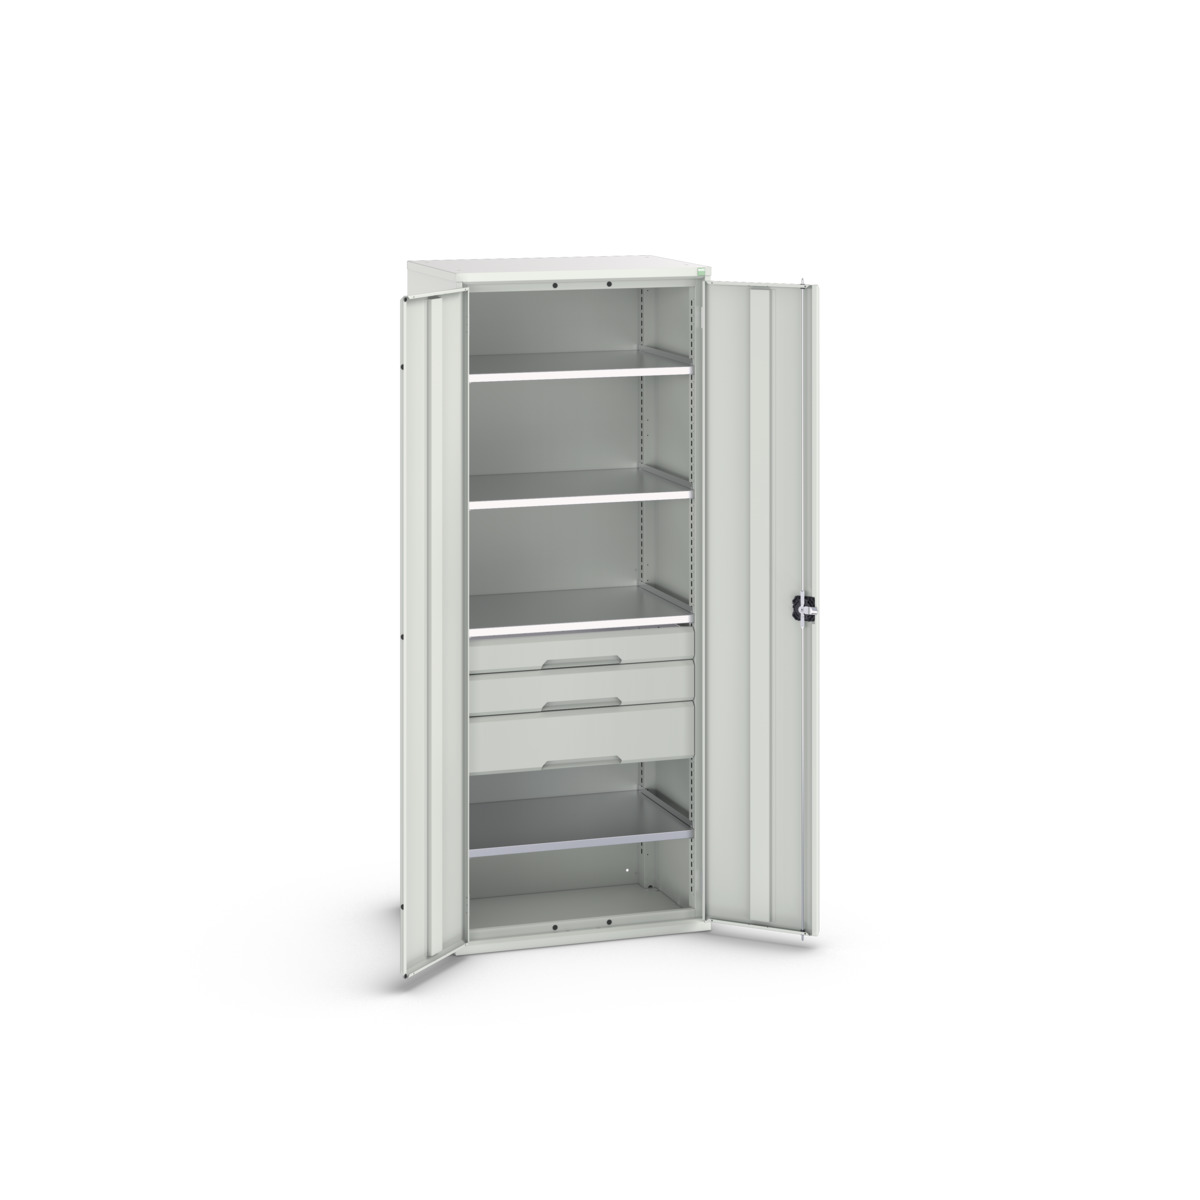 16926456.16 - verso kitted cupboard